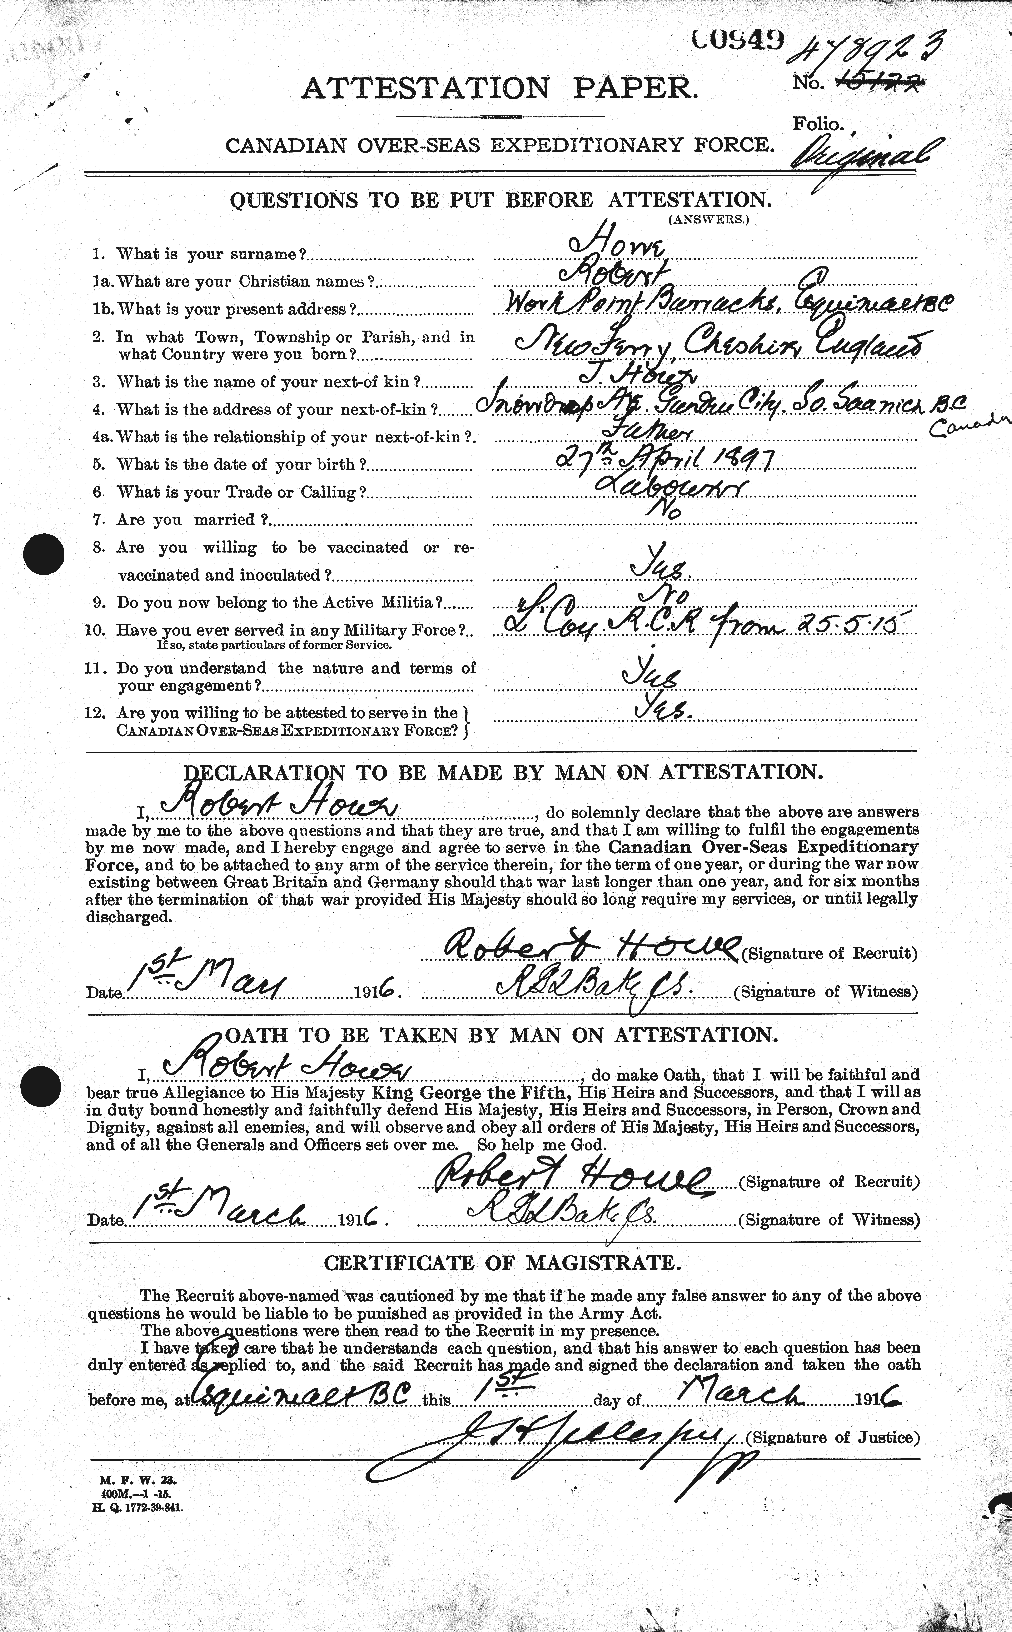 Personnel Records of the First World War - CEF 402093a